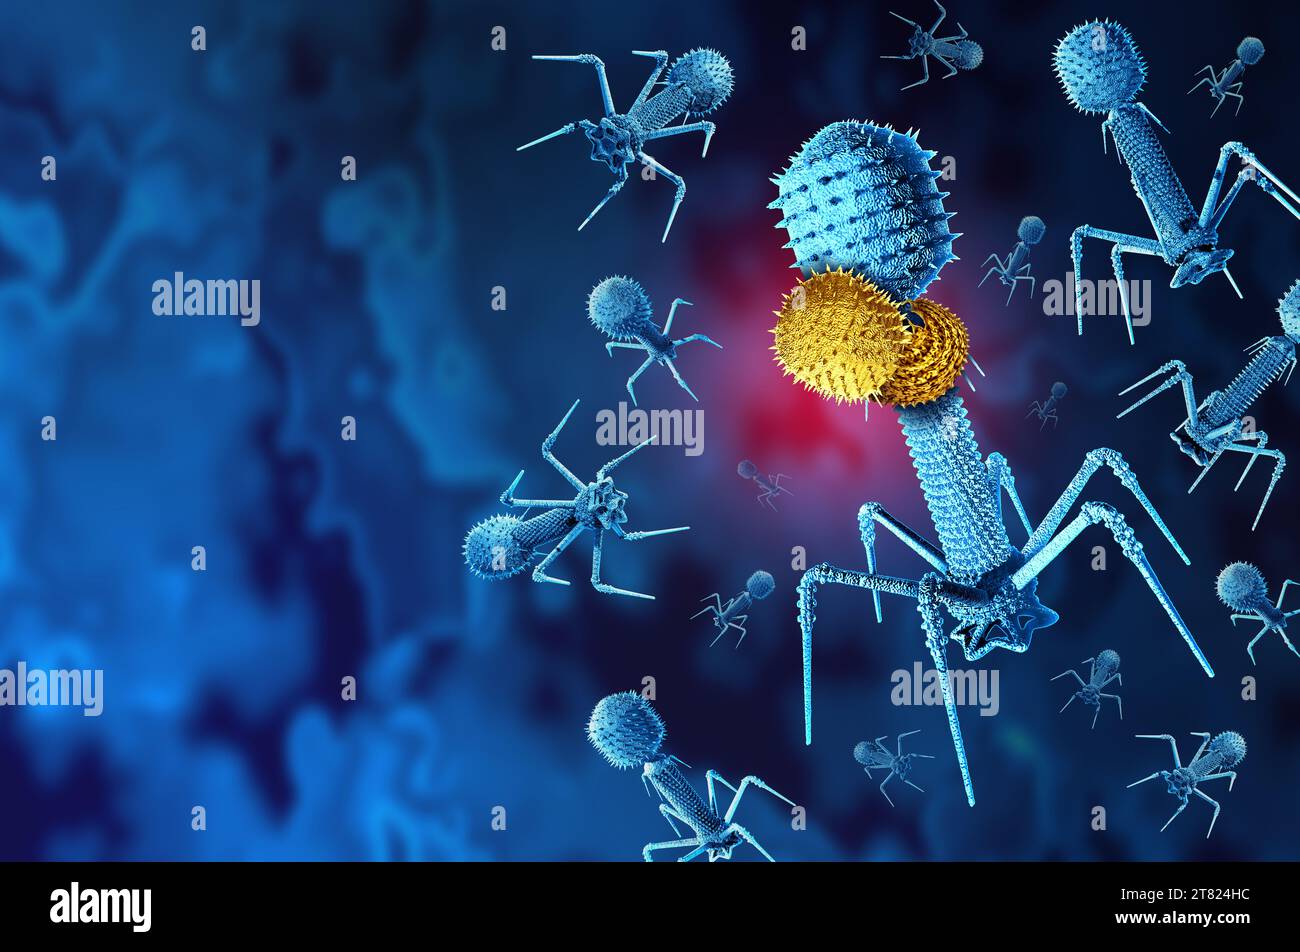 Vampire virus as a small MiniFlayer Phage attaching itself to another helper Bacteriophage that infects viruses to replicate as a virology symbol of a Stock Photo